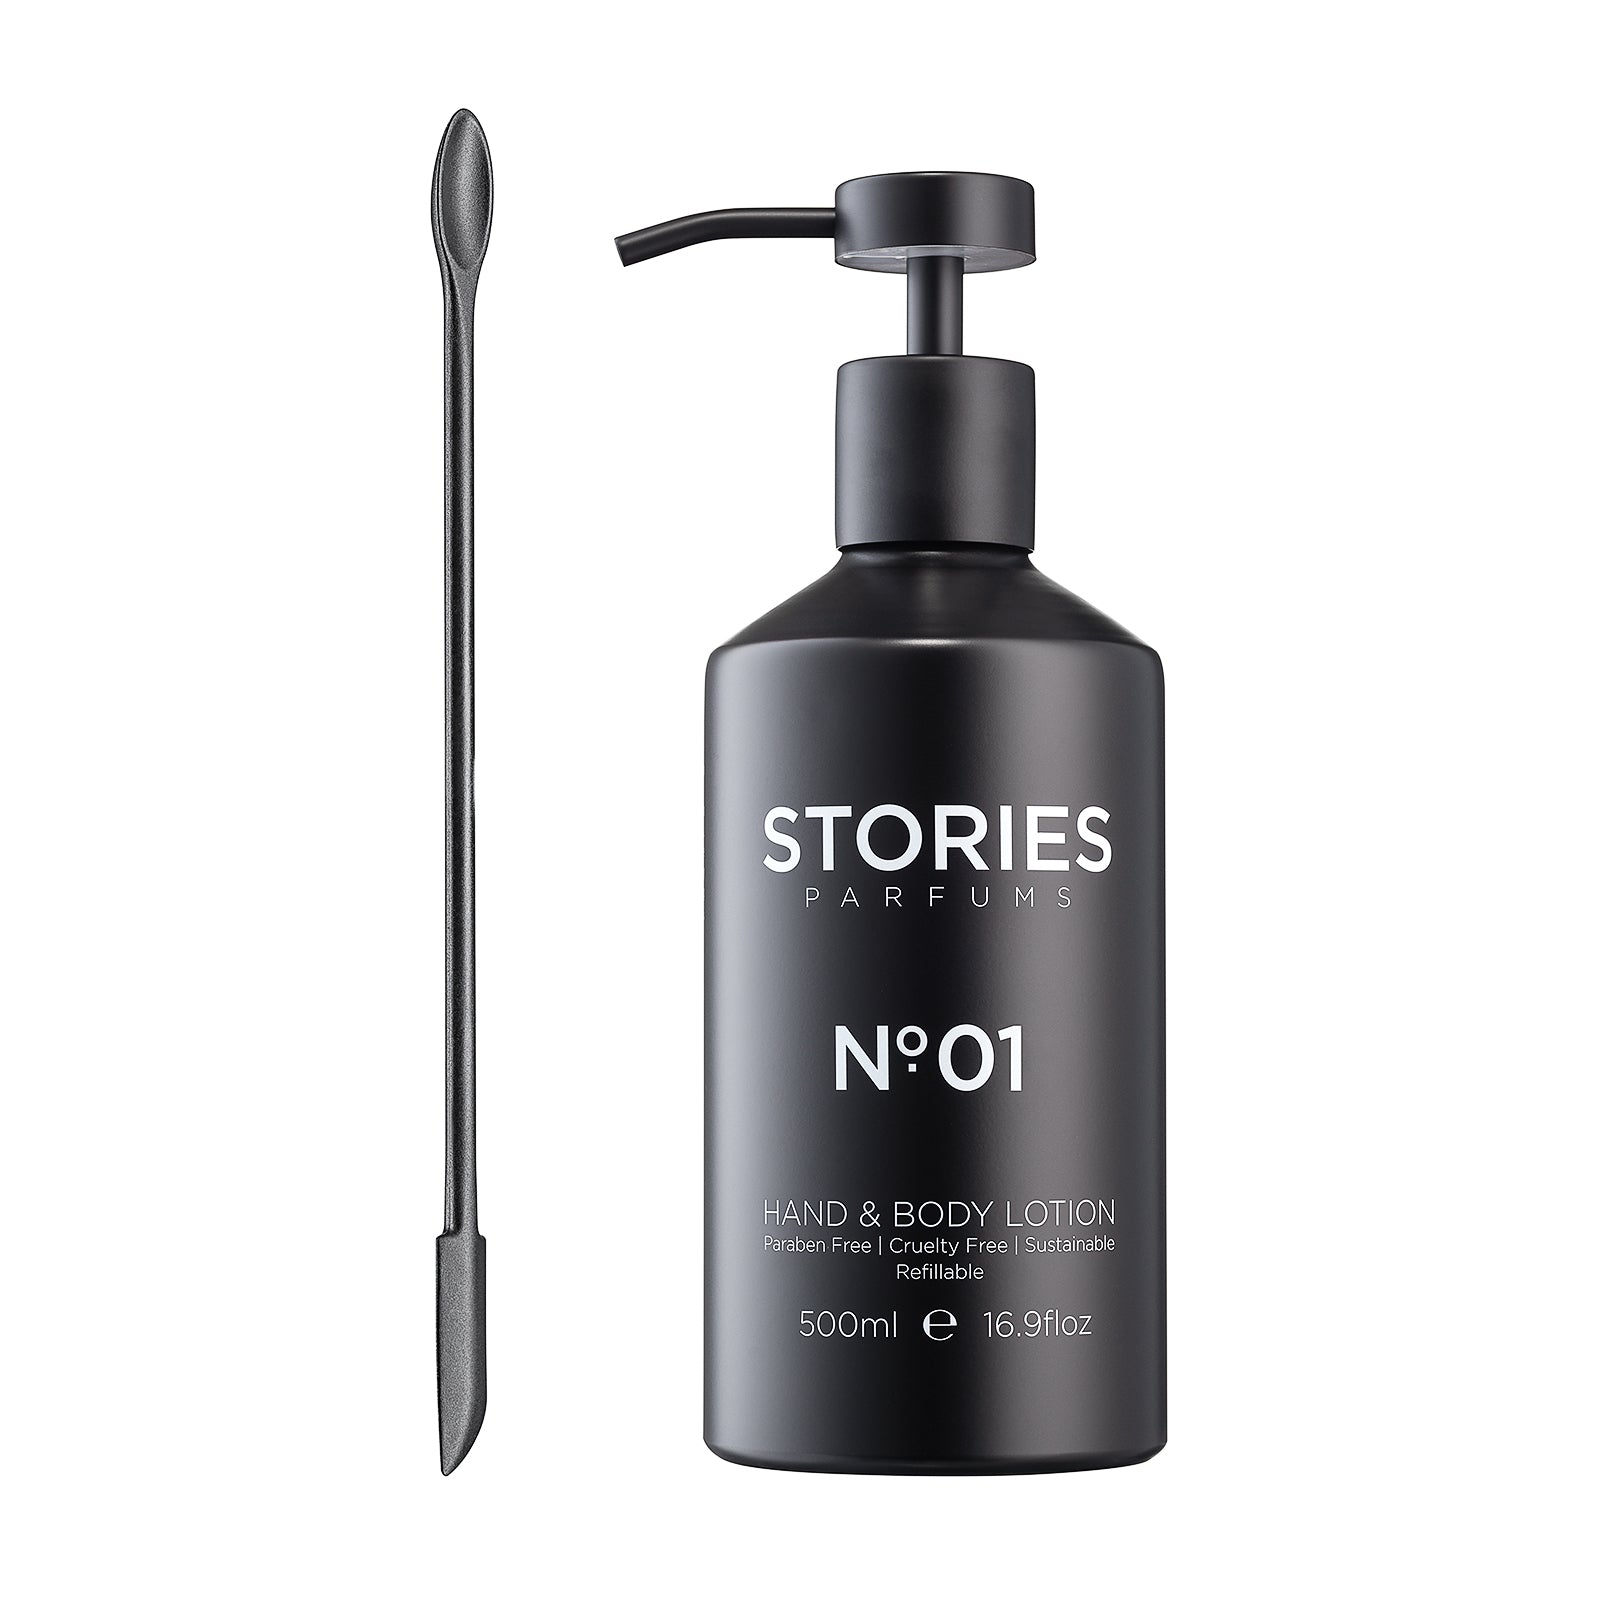 The STORIES Body Wand